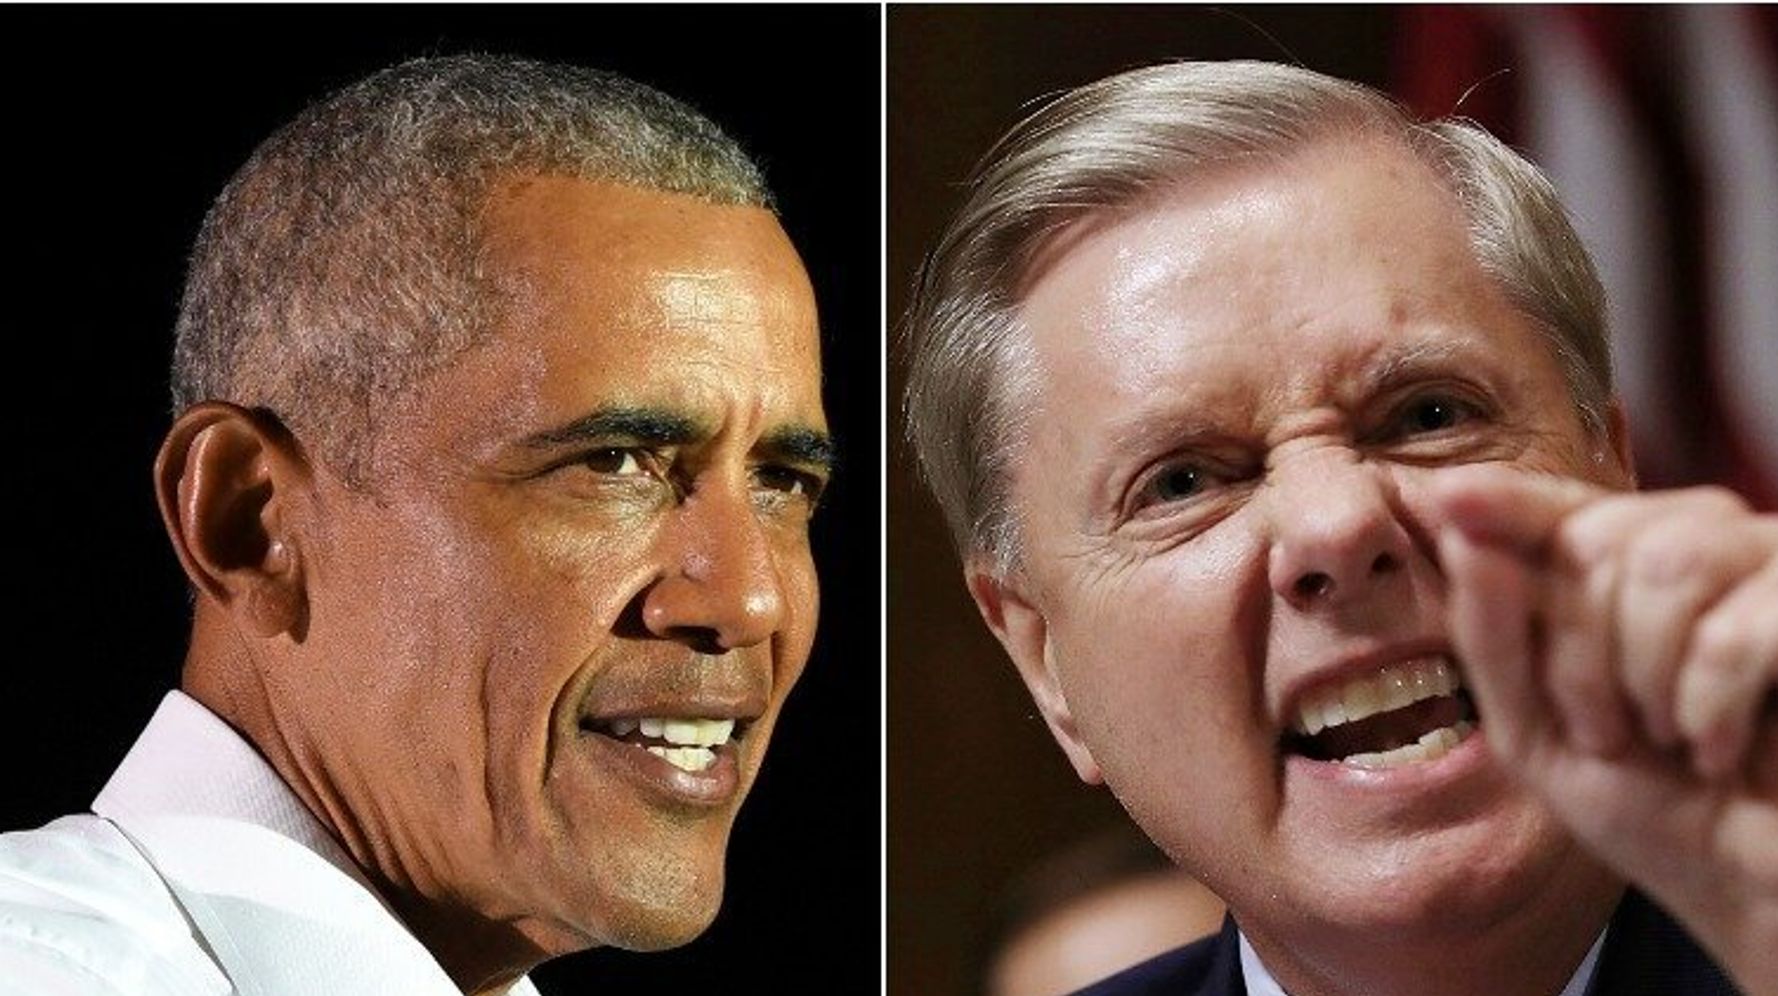 Barack Obama Has A Damning Description Of Lindsey Graham In His New Book